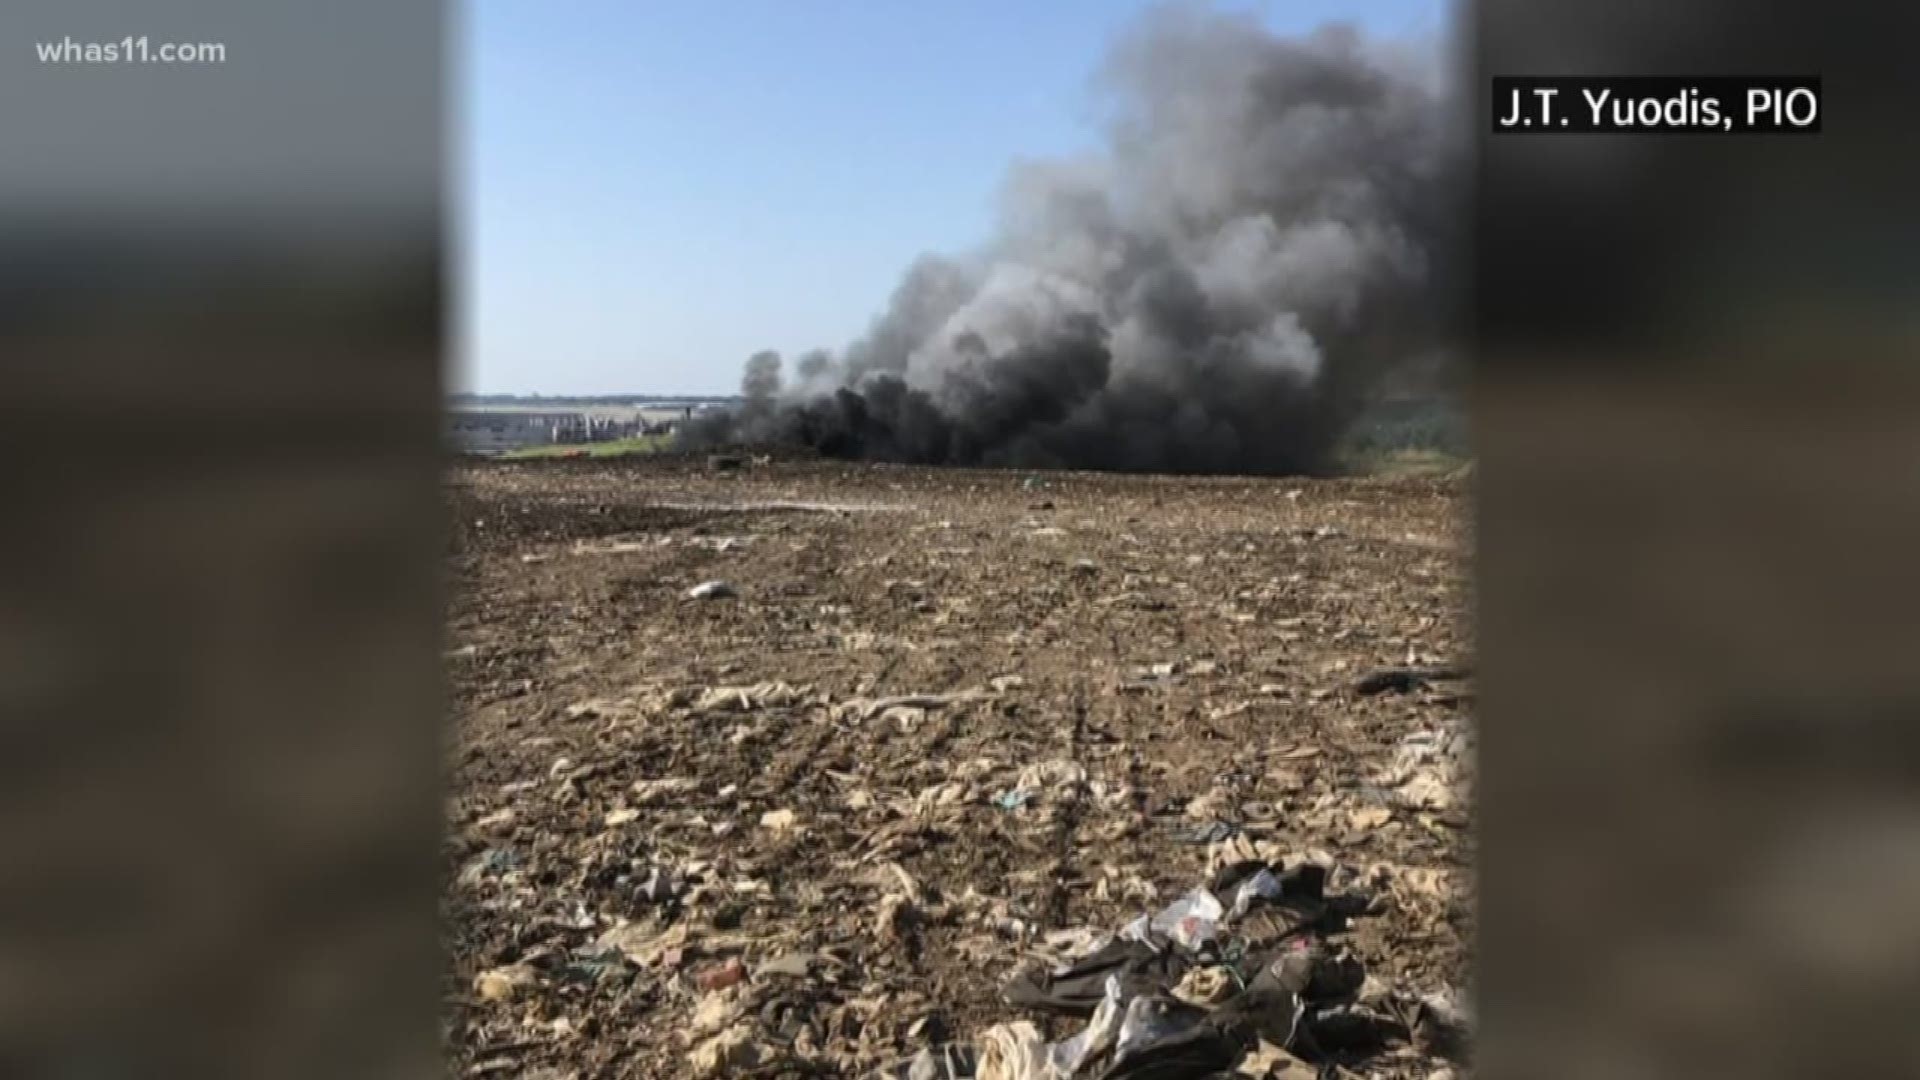 No injuries were reported after crews battled a large fire at the Waste Management facility on Outer Loop.